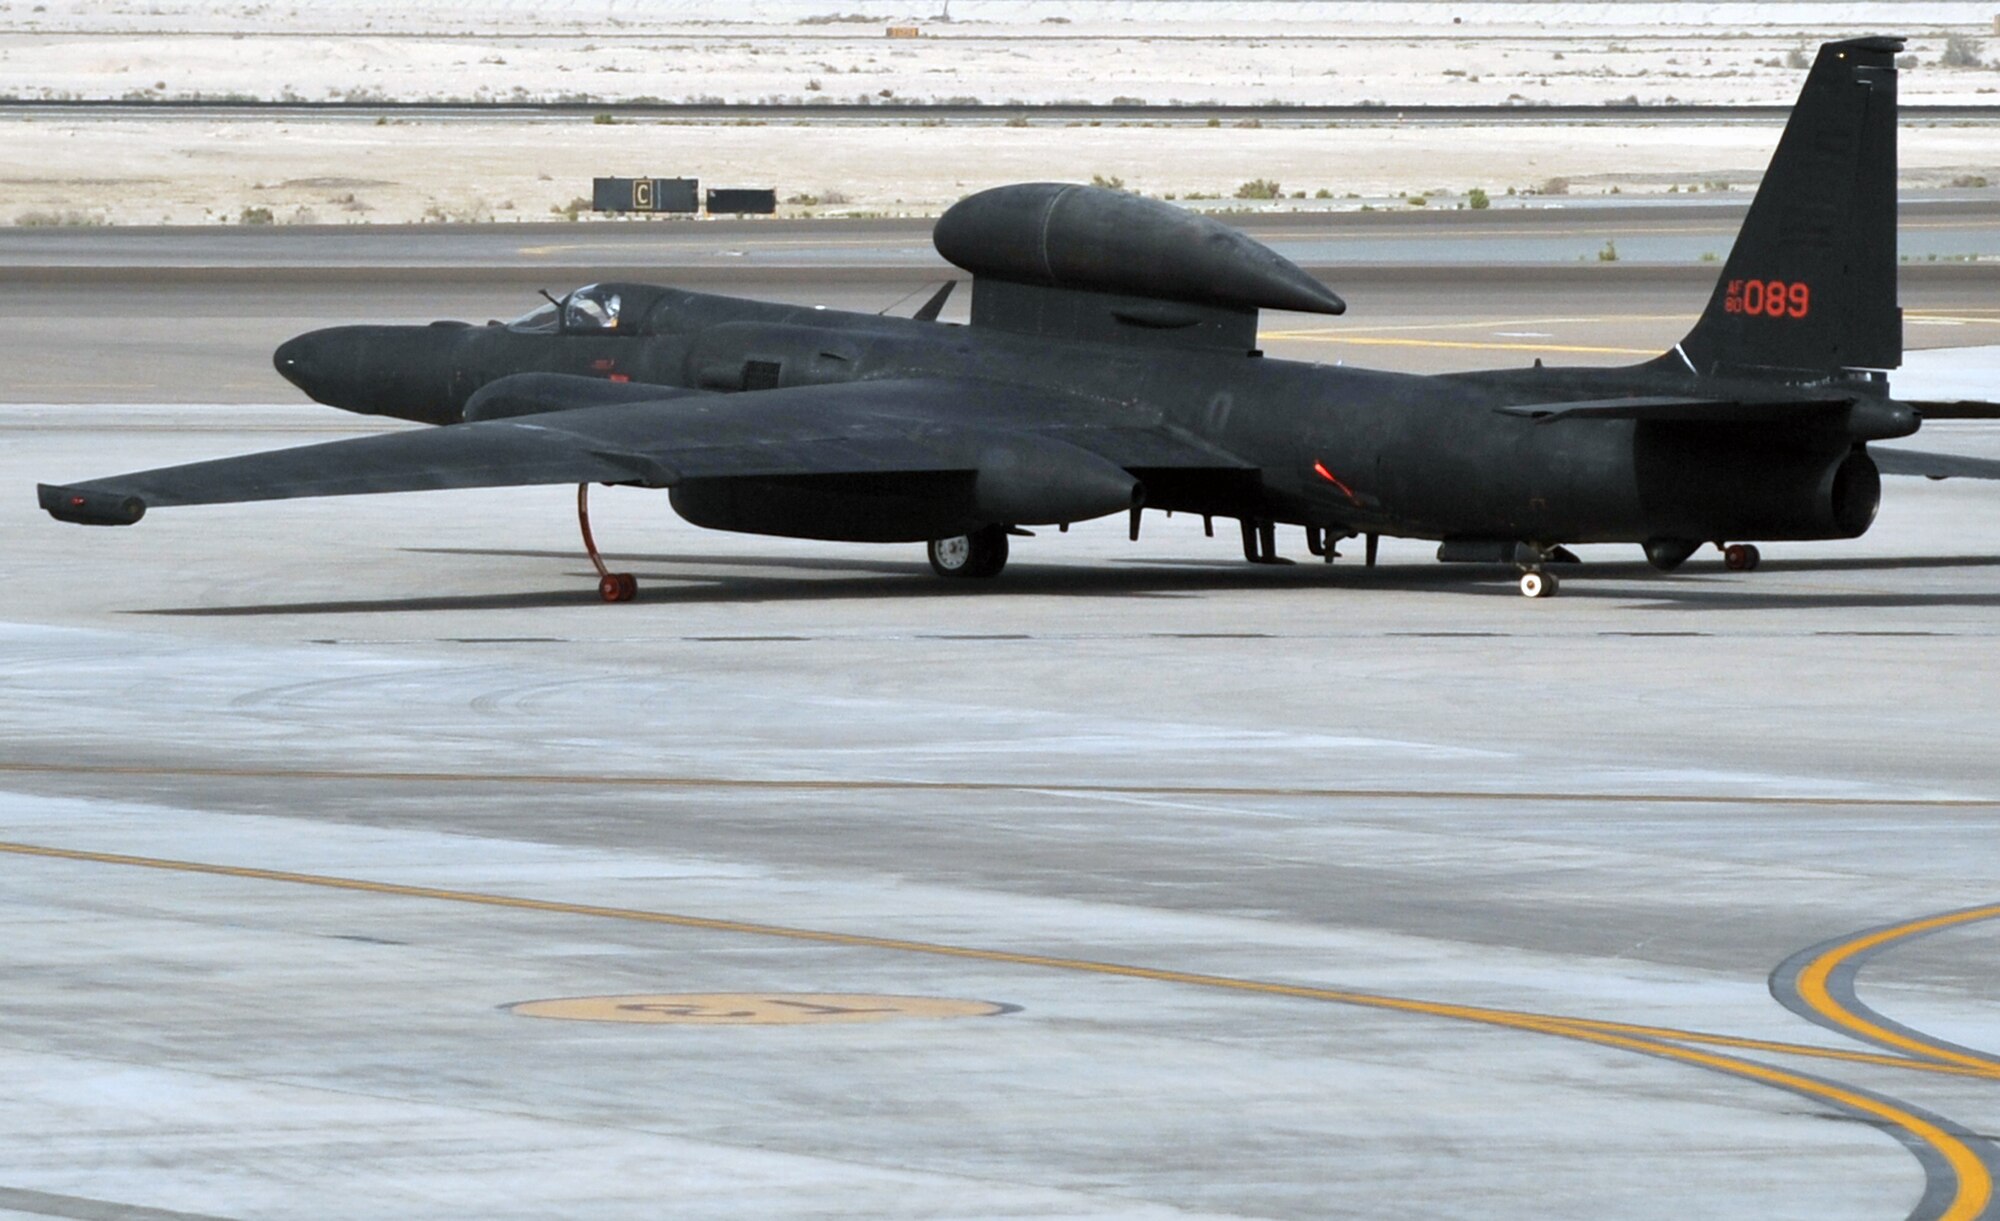 A pilot guides a U-2 Dragon Lady across the air field April 24, 2010, en route to a mission in support of operations in the U.S. Central Command area of responsibility from a non-disclosed base in Southwest Asia. The pilot and the U-2 are with the 99th Expeditionary Reconnaissance Squadron, a unit of the 380th Air Expeditionary Wing.  Through the first three months of 2010, U-2s from the 99th ERS flew nearly 200 missions in support of intelligence, surveillance and reconnaissance requirements for deployed forces supporting operations Iraqi Freedom and Enduring Freedom and the Combined Joint Task Force-Horn of Africa. (U.S. Air Force Photo/Master Sgt. Scott T. Sturkol/Released)